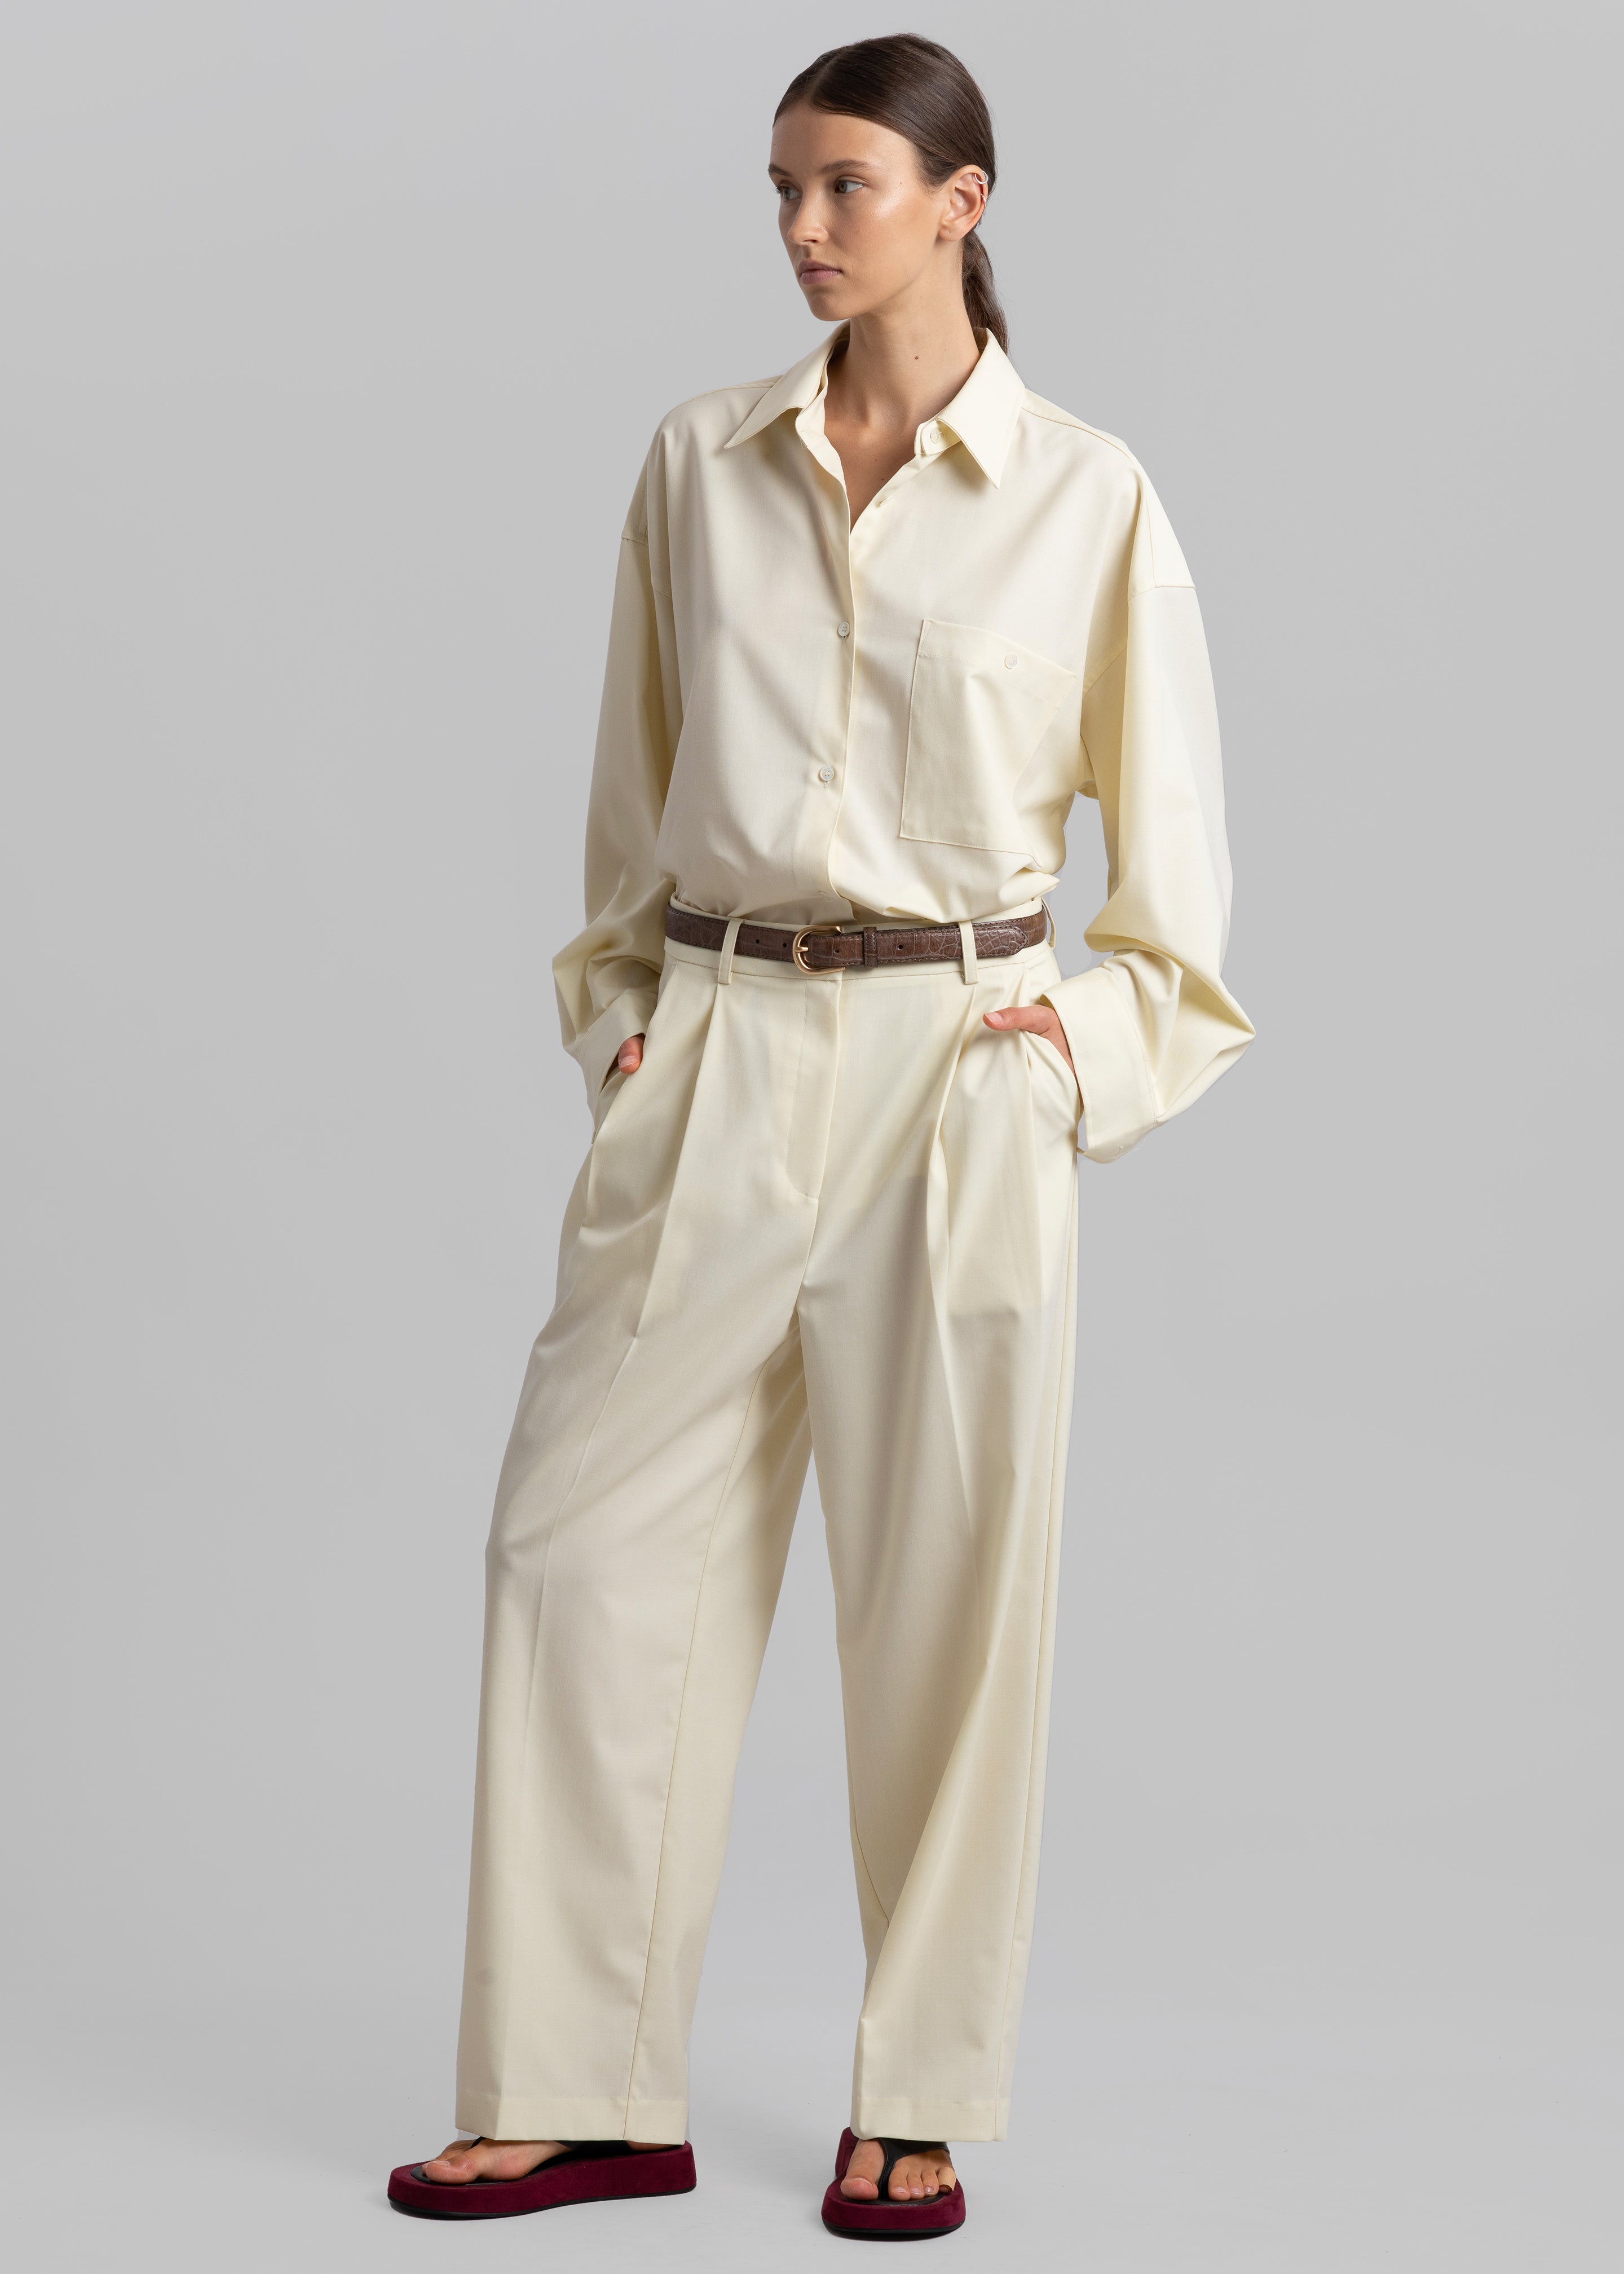 LaPointe - Cream Silky Twill High-Rise Belted Wide Leg Pant